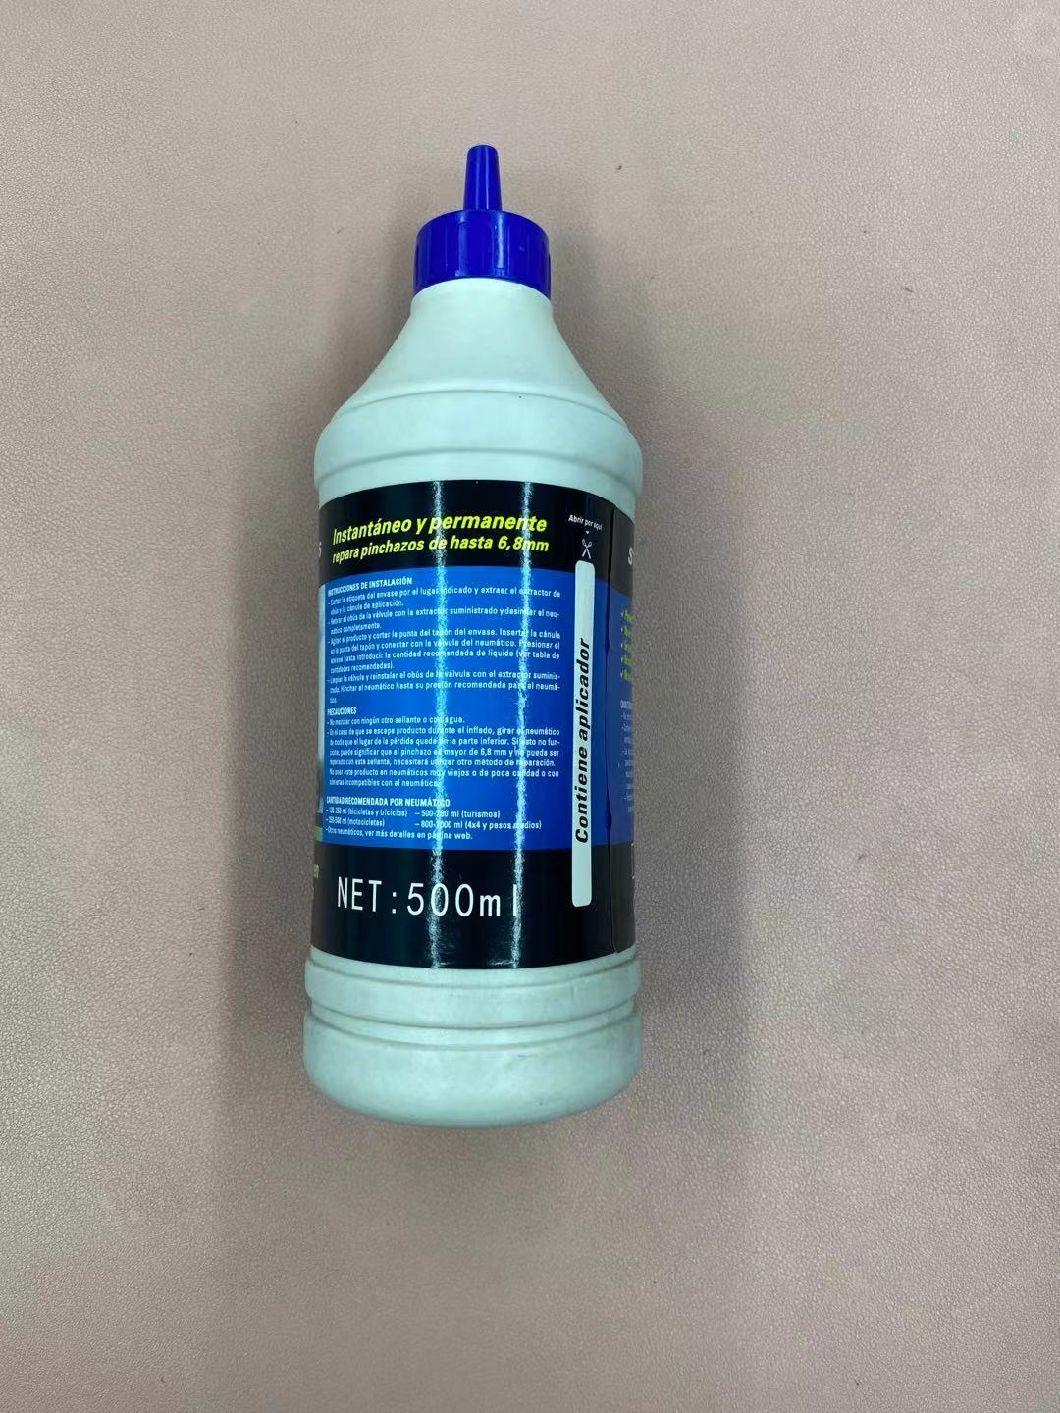 Production Equip Motorcycle/Bicycle/Car/Bike Universal Glue Tyre Fix Puncture Repair Sealant, Antirust Luquid Tyre Repair Sealant Pucture Liquid Tire Sealant